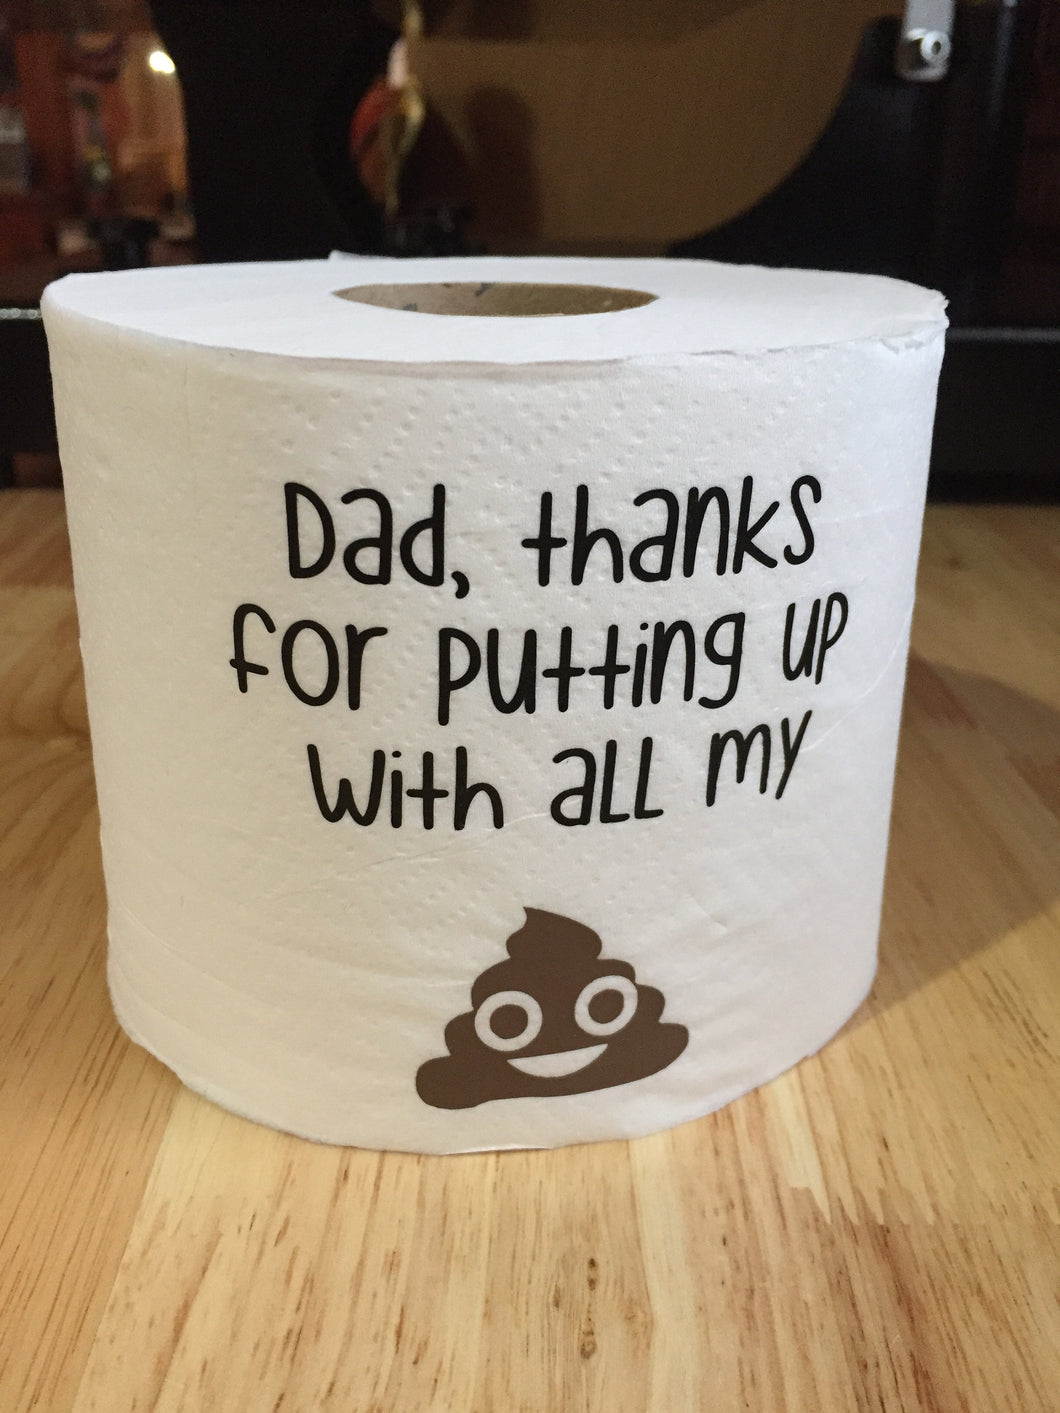 Dad Thank You Funny Gag Gift, Funny Thank You Dad Gag Gift, Thank You Dad Funny Gag Gift, Funny Birthday Gift, Funny Fathers Day Gag Gift